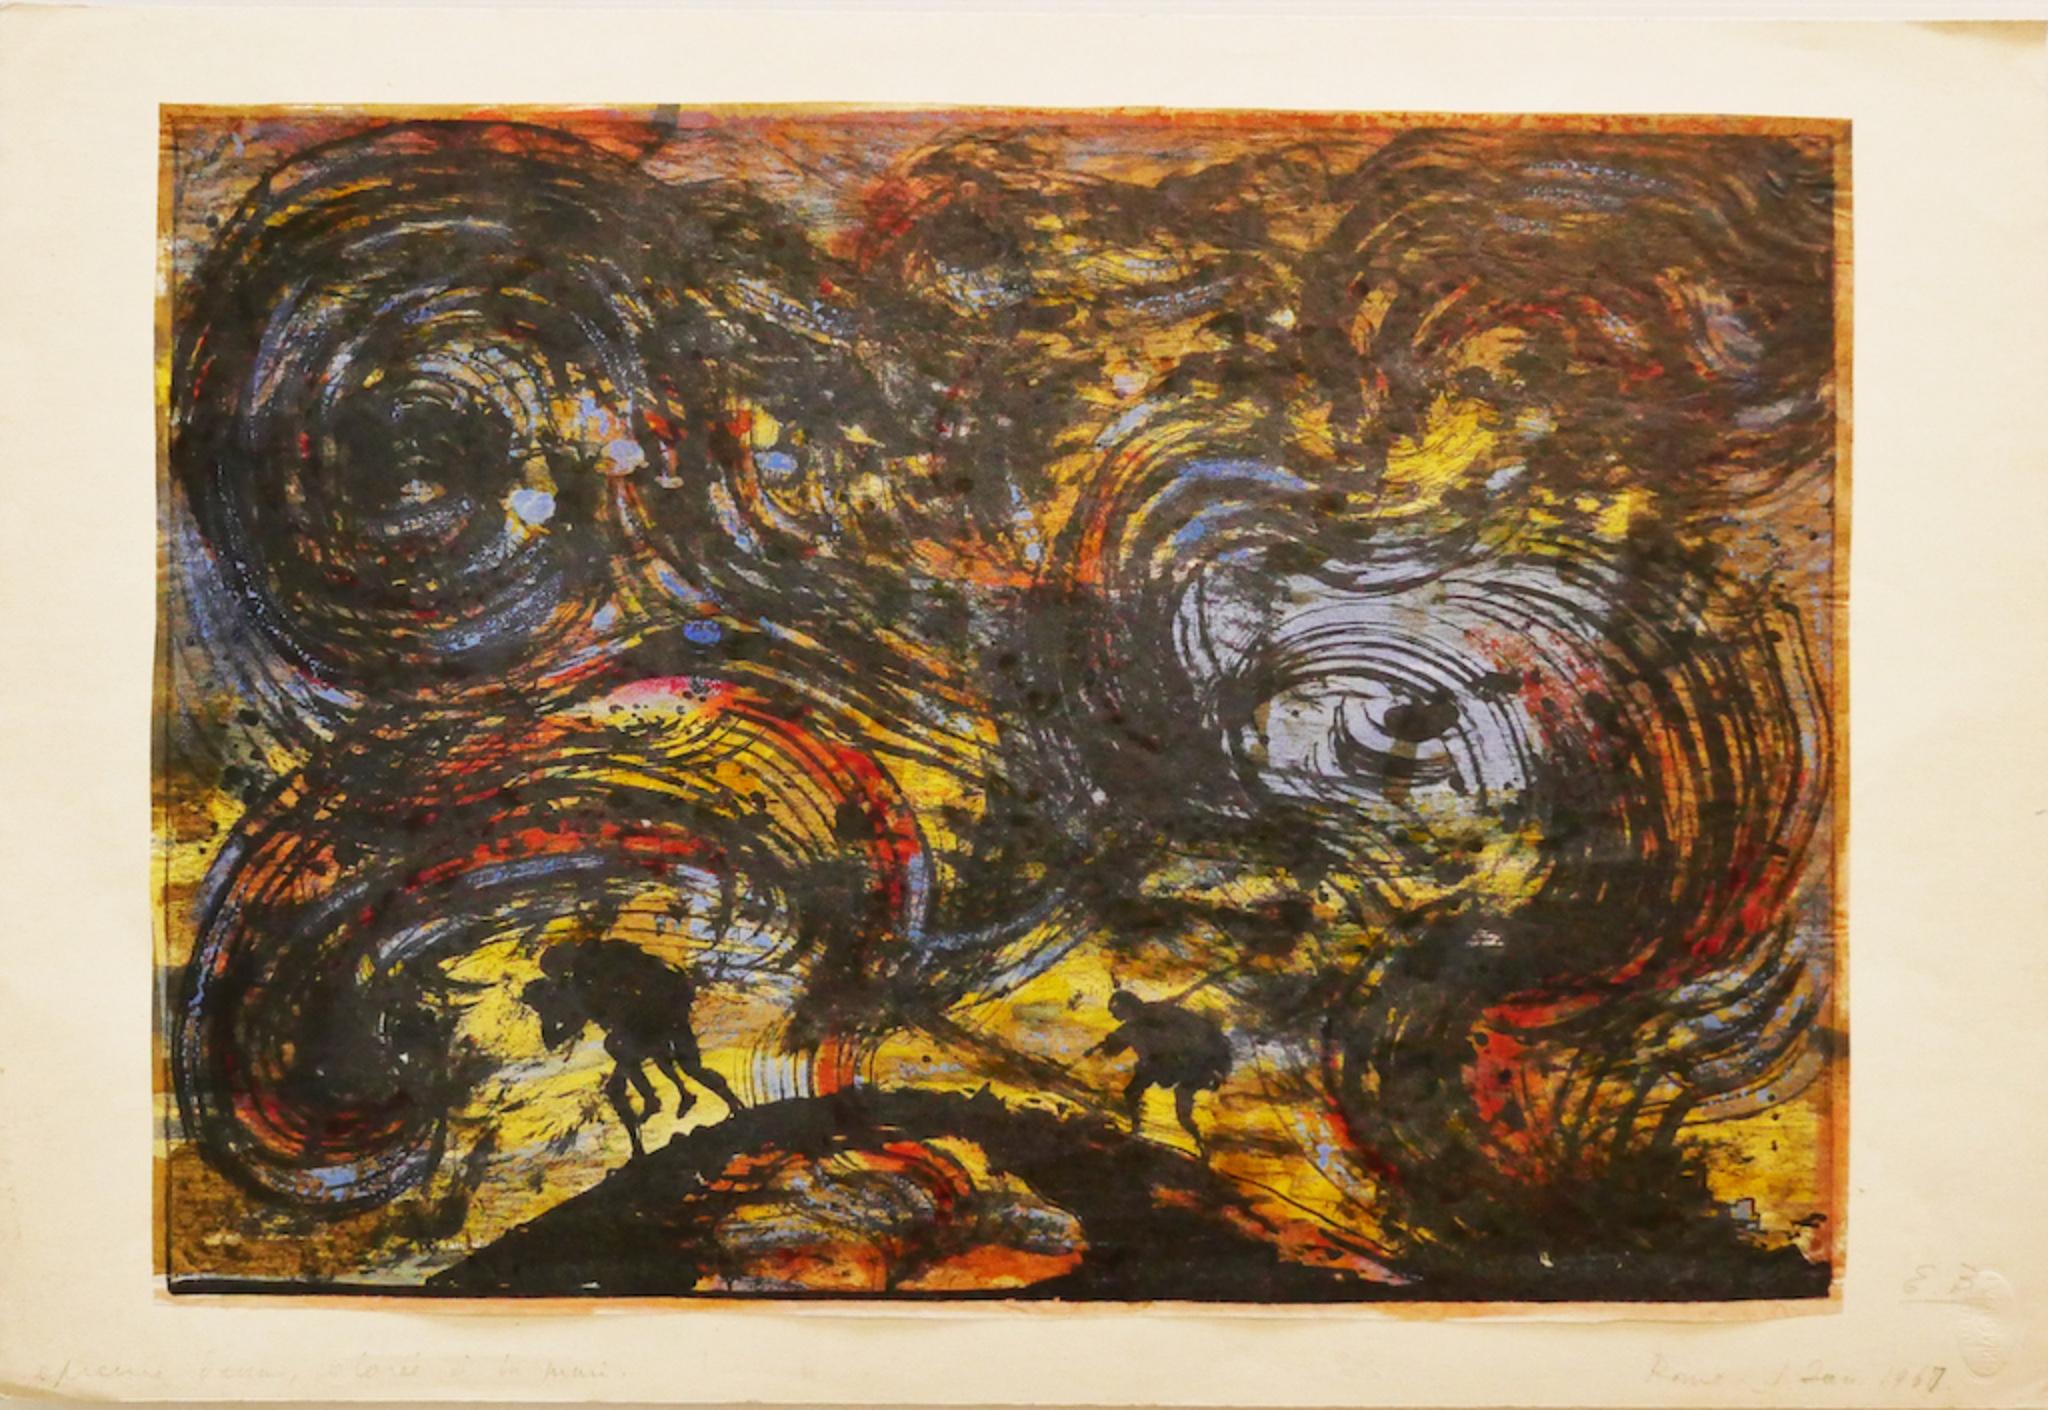 Eugene Berman Abstract Print - Escape from Troy - Original Lithograph by Eugène Berman - 1960s